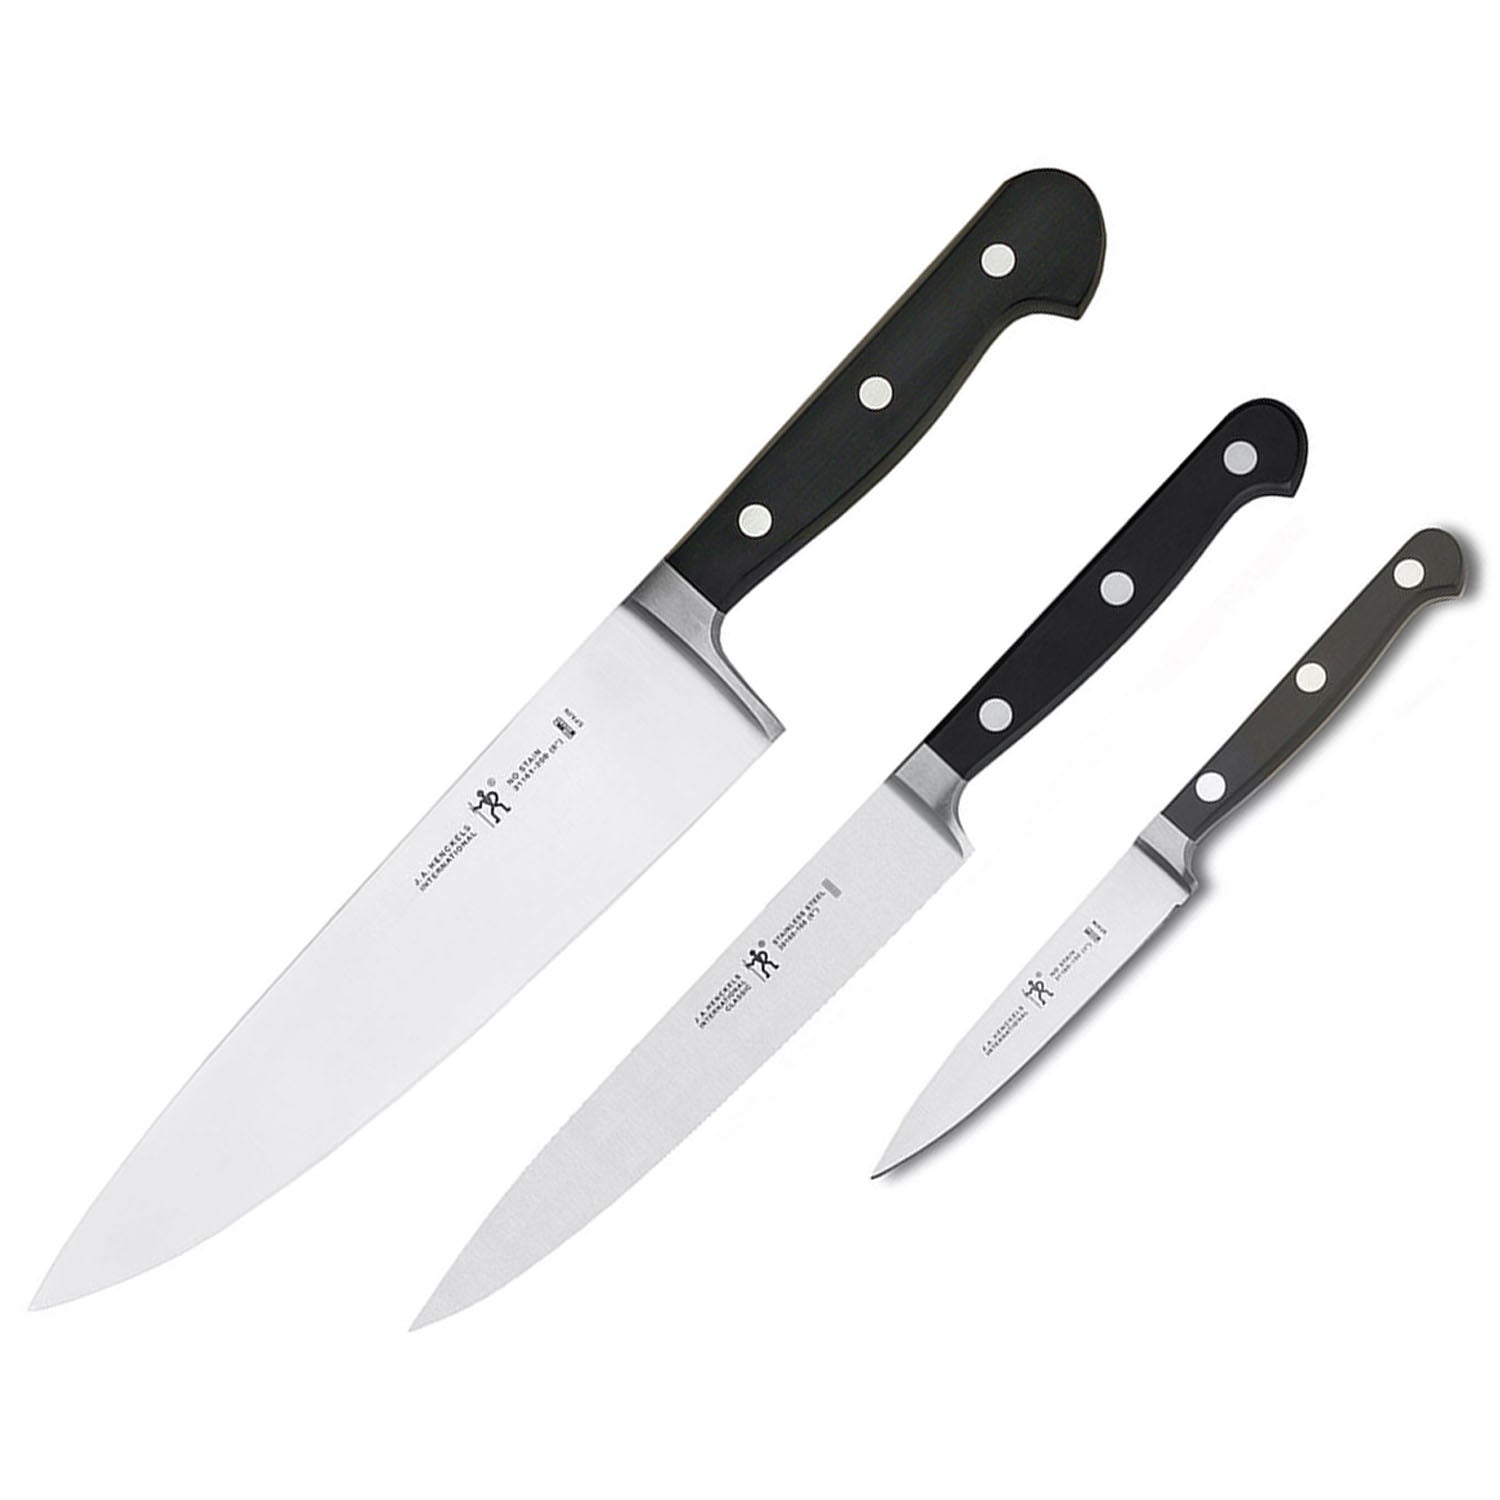 Zwilling Classic Precision Starter 3-Piece Knife Set + Reviews